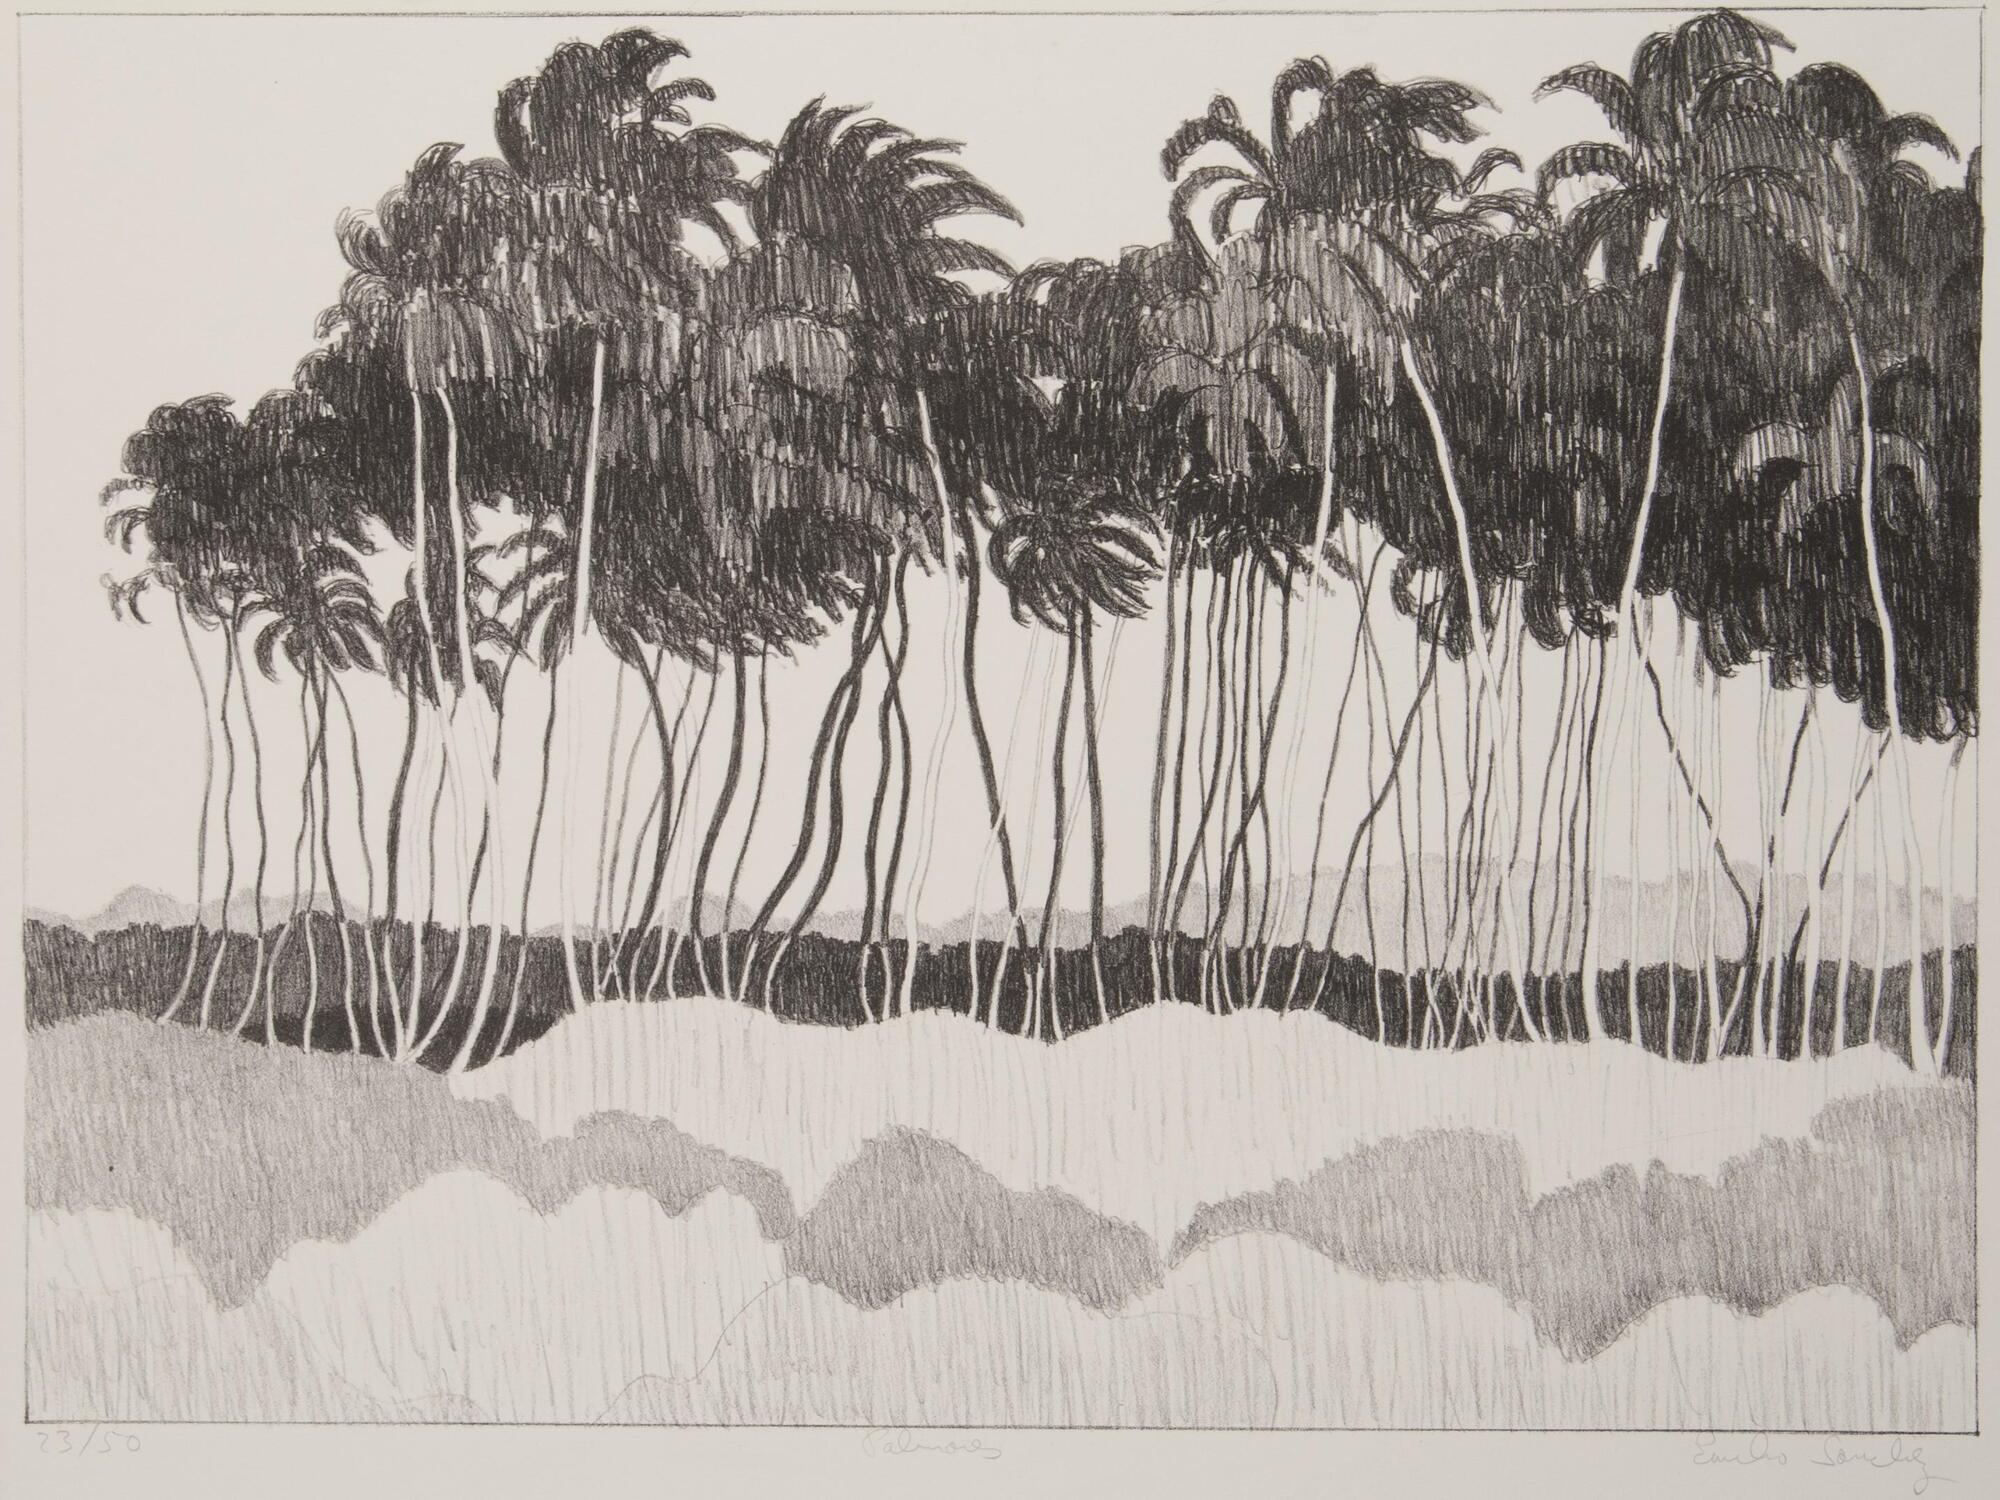 A black and white lithograph depicts a number of palm trees.